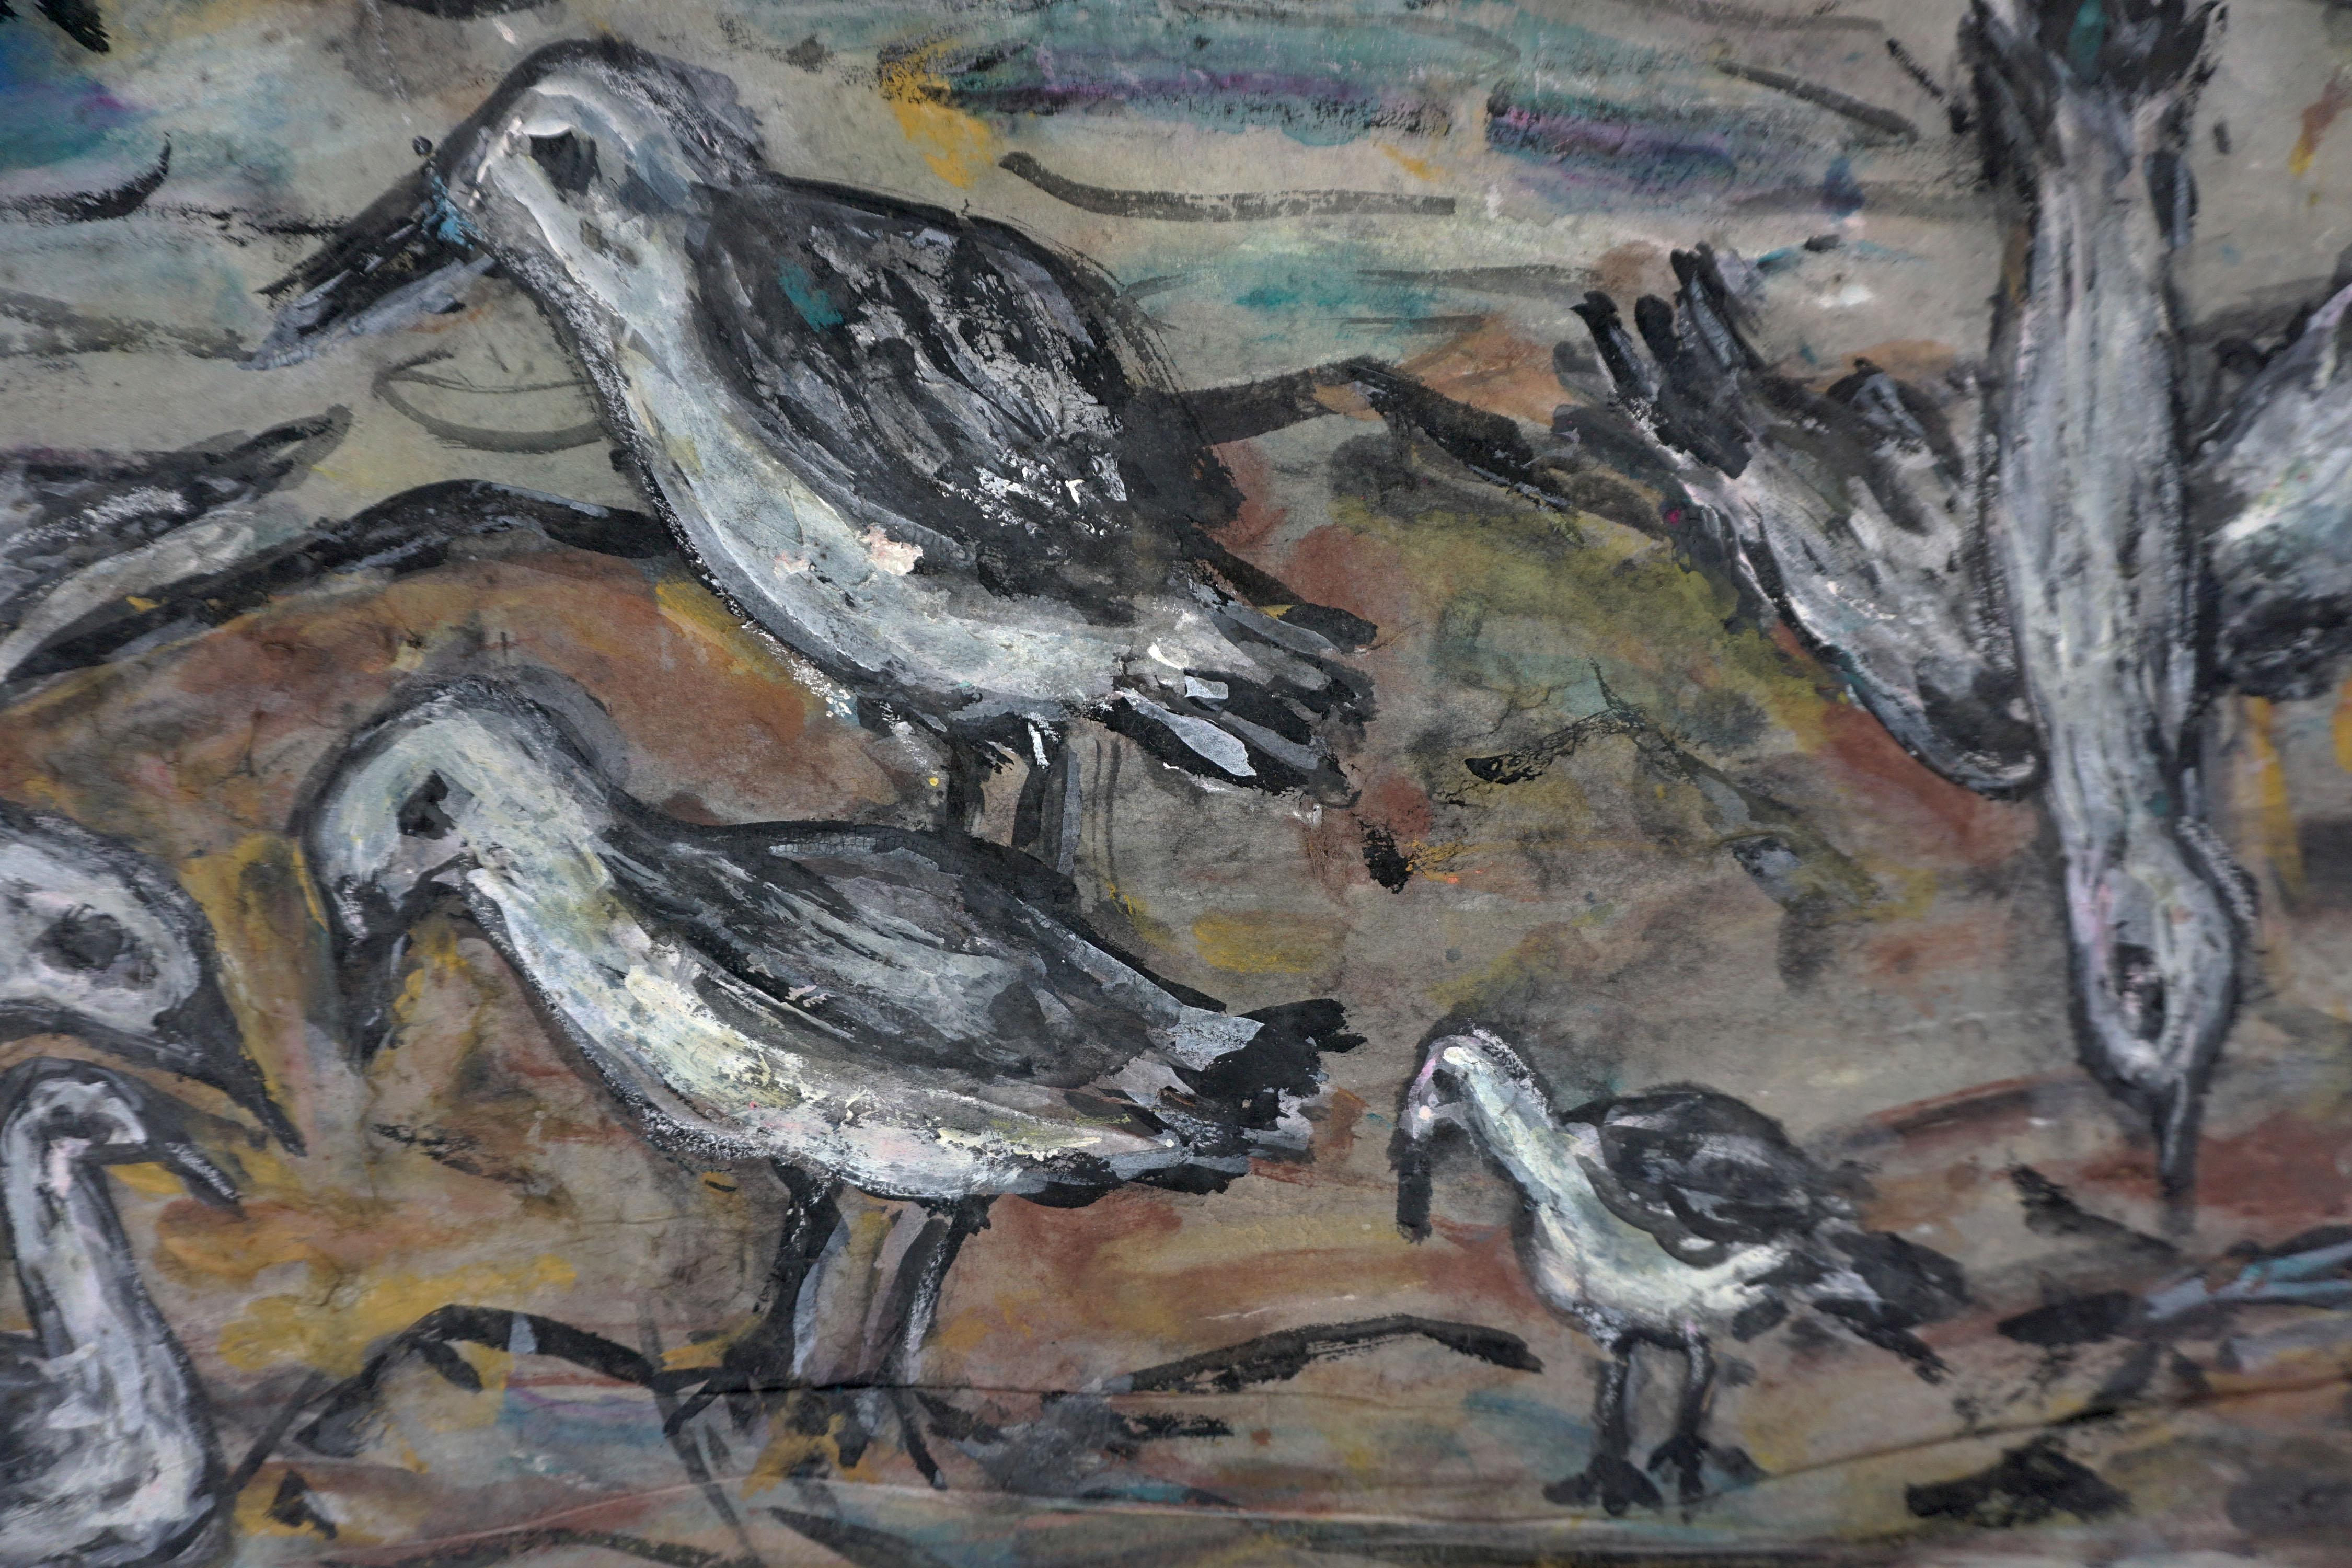 Mid Century Abstract Expressionist Painting of San Francisco Bay Shorebirds at Surf's Edge

1950's abstract expressionist painting of shorebirds at water's edge by San Francisco artist Honora Berg (American, 1897-1985). Western Gulls and Sanderlings